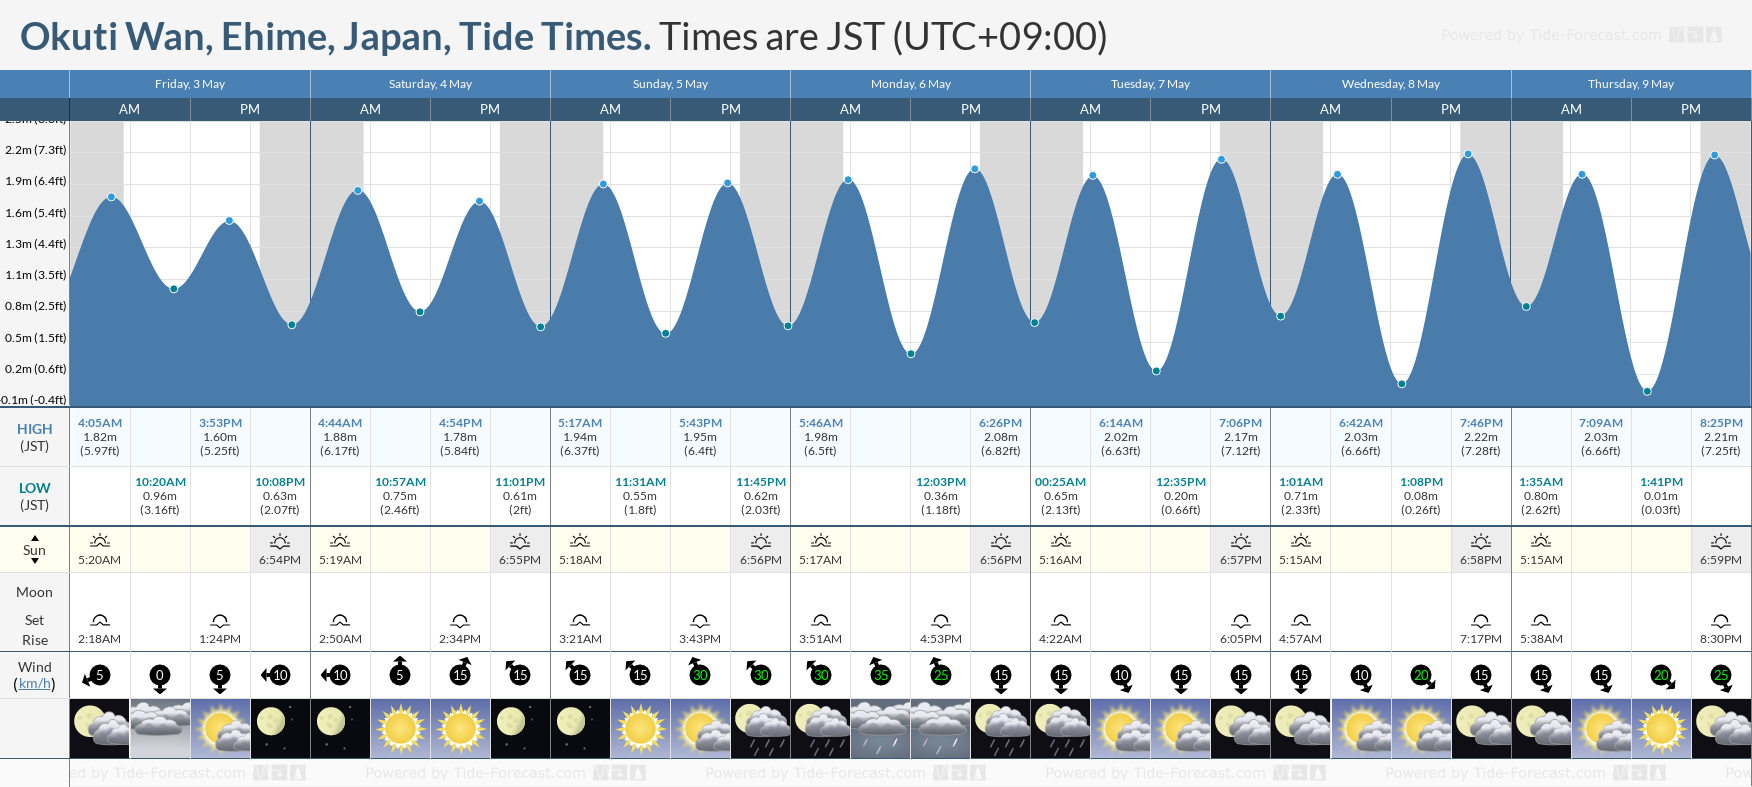 Okuti Wan, Ehime, Japan Tide Chart including high and low tide tide times for the next 7 days